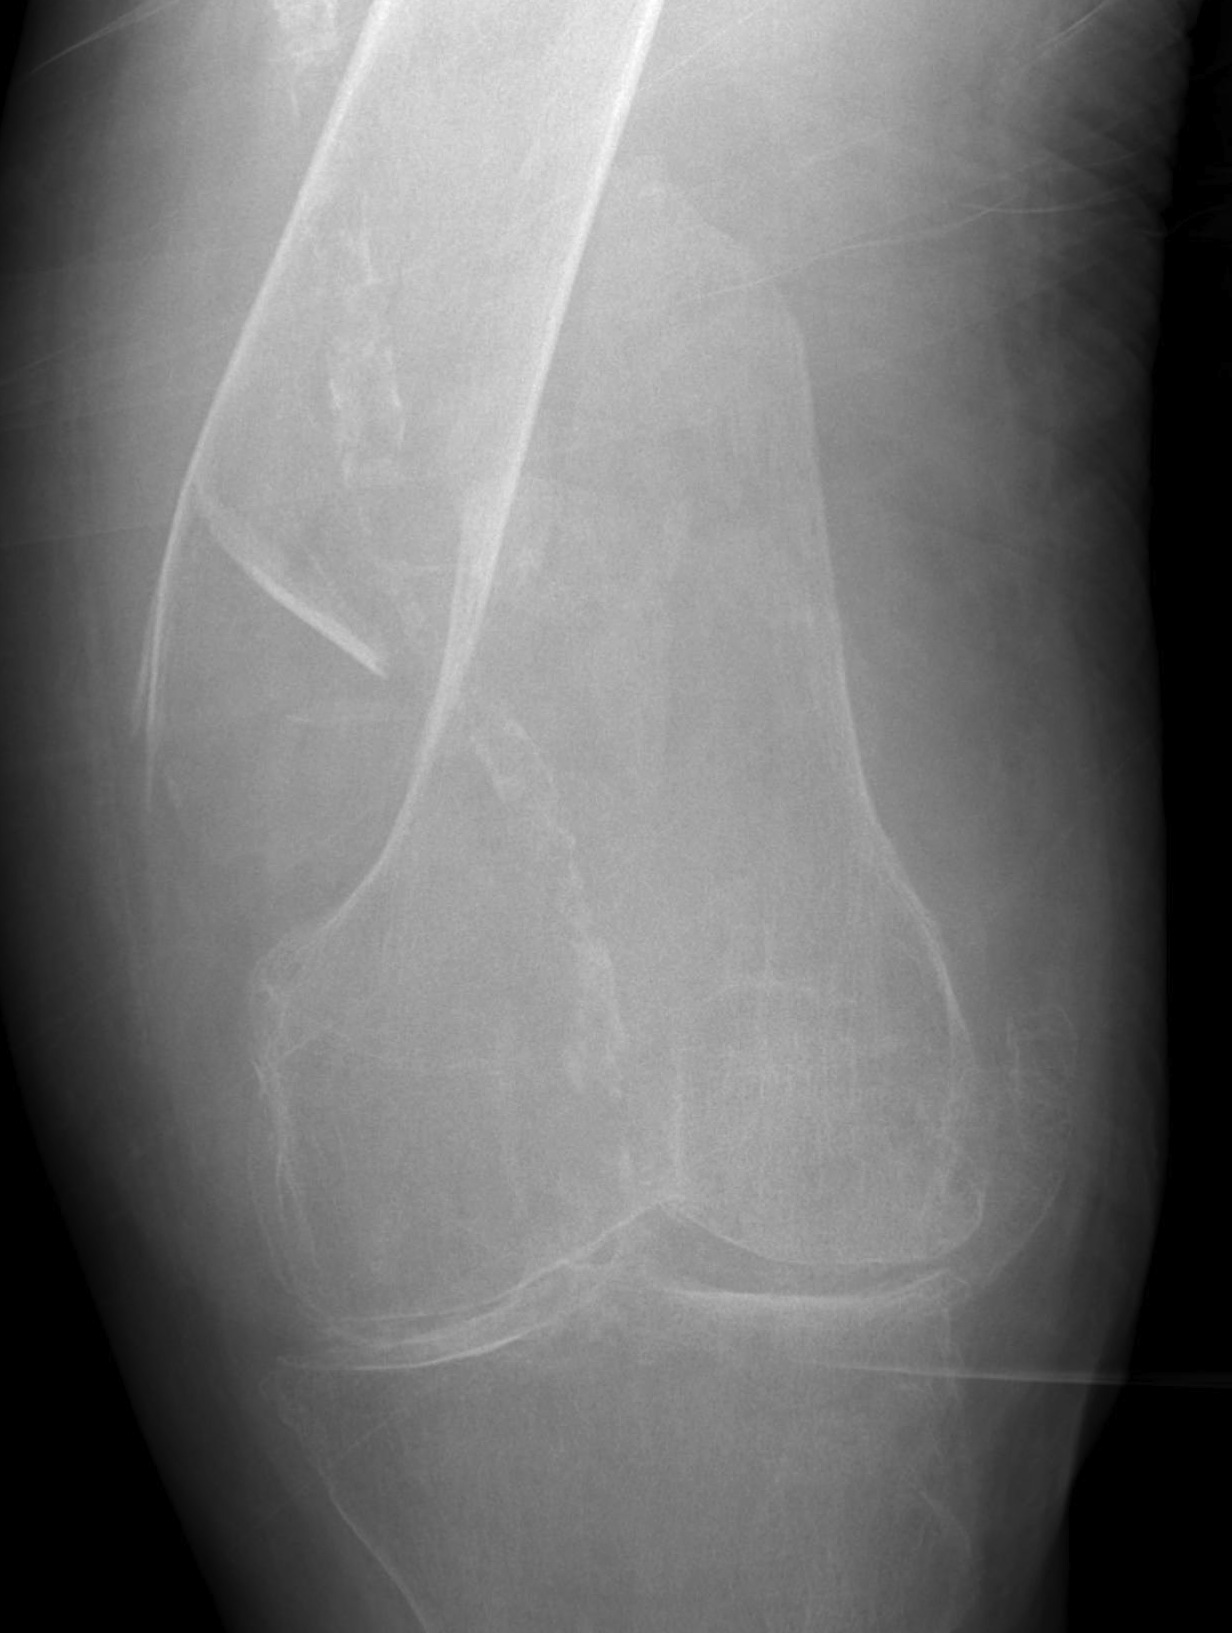 Distal femoral fracture